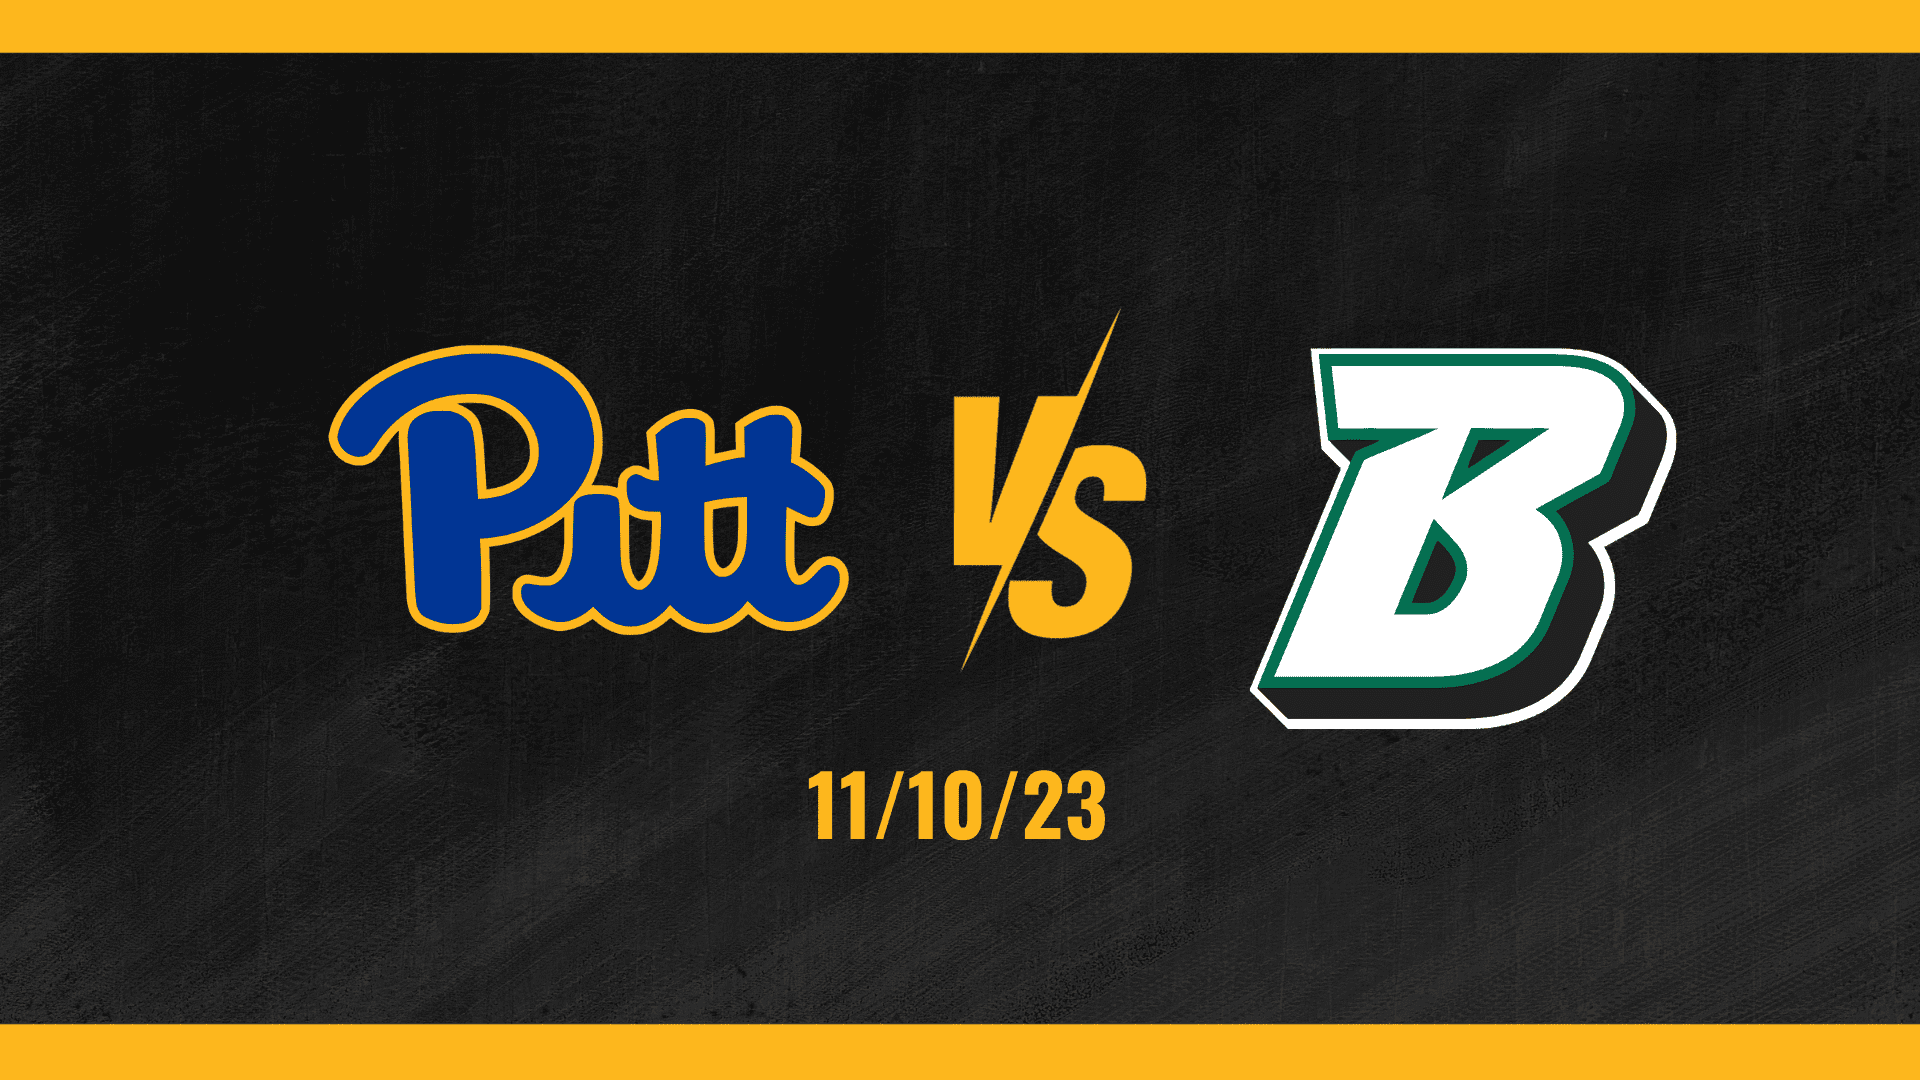 Pitt basketball will take on Binghamton basketball on Friday, November 10. Check out the spread, the game time, the TV channel, the rosters, and more.